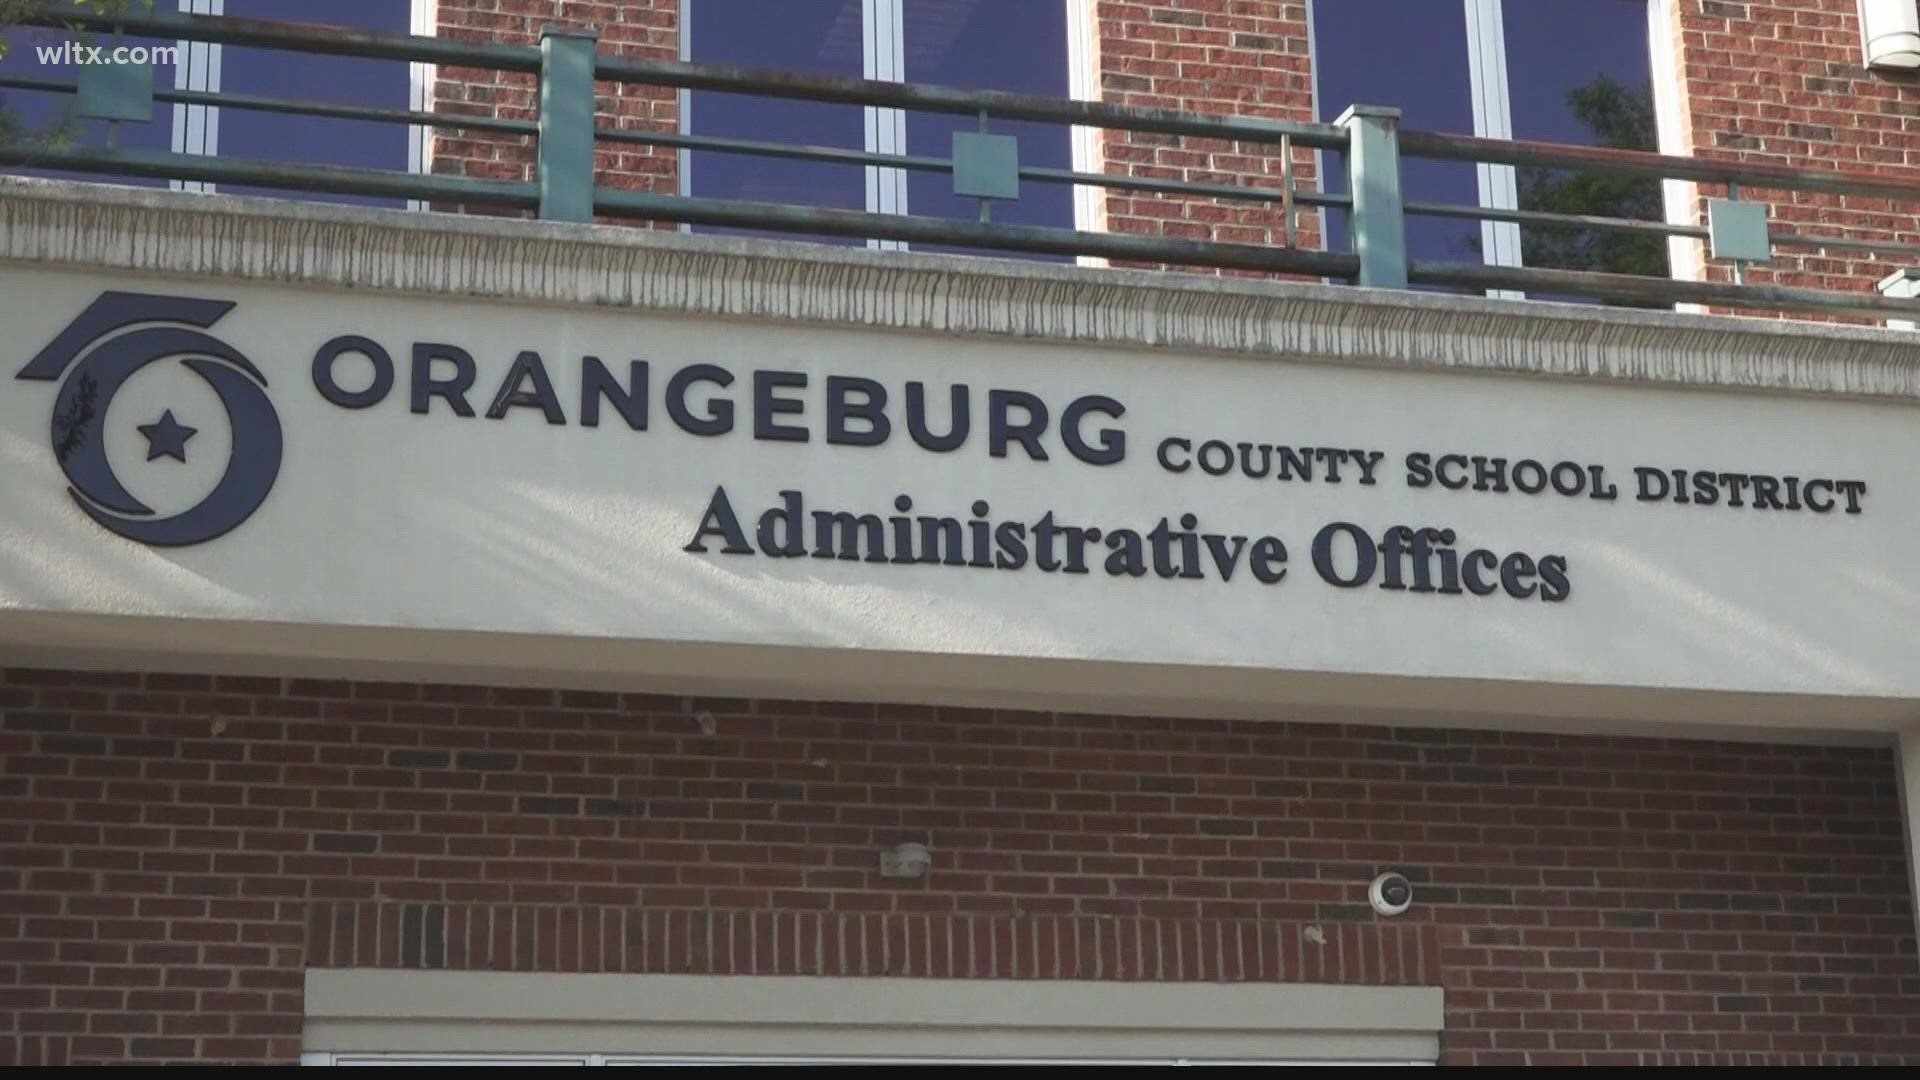 According to OTT, there are multiple schools in the Orangeburg County school district that do not have SRO's.